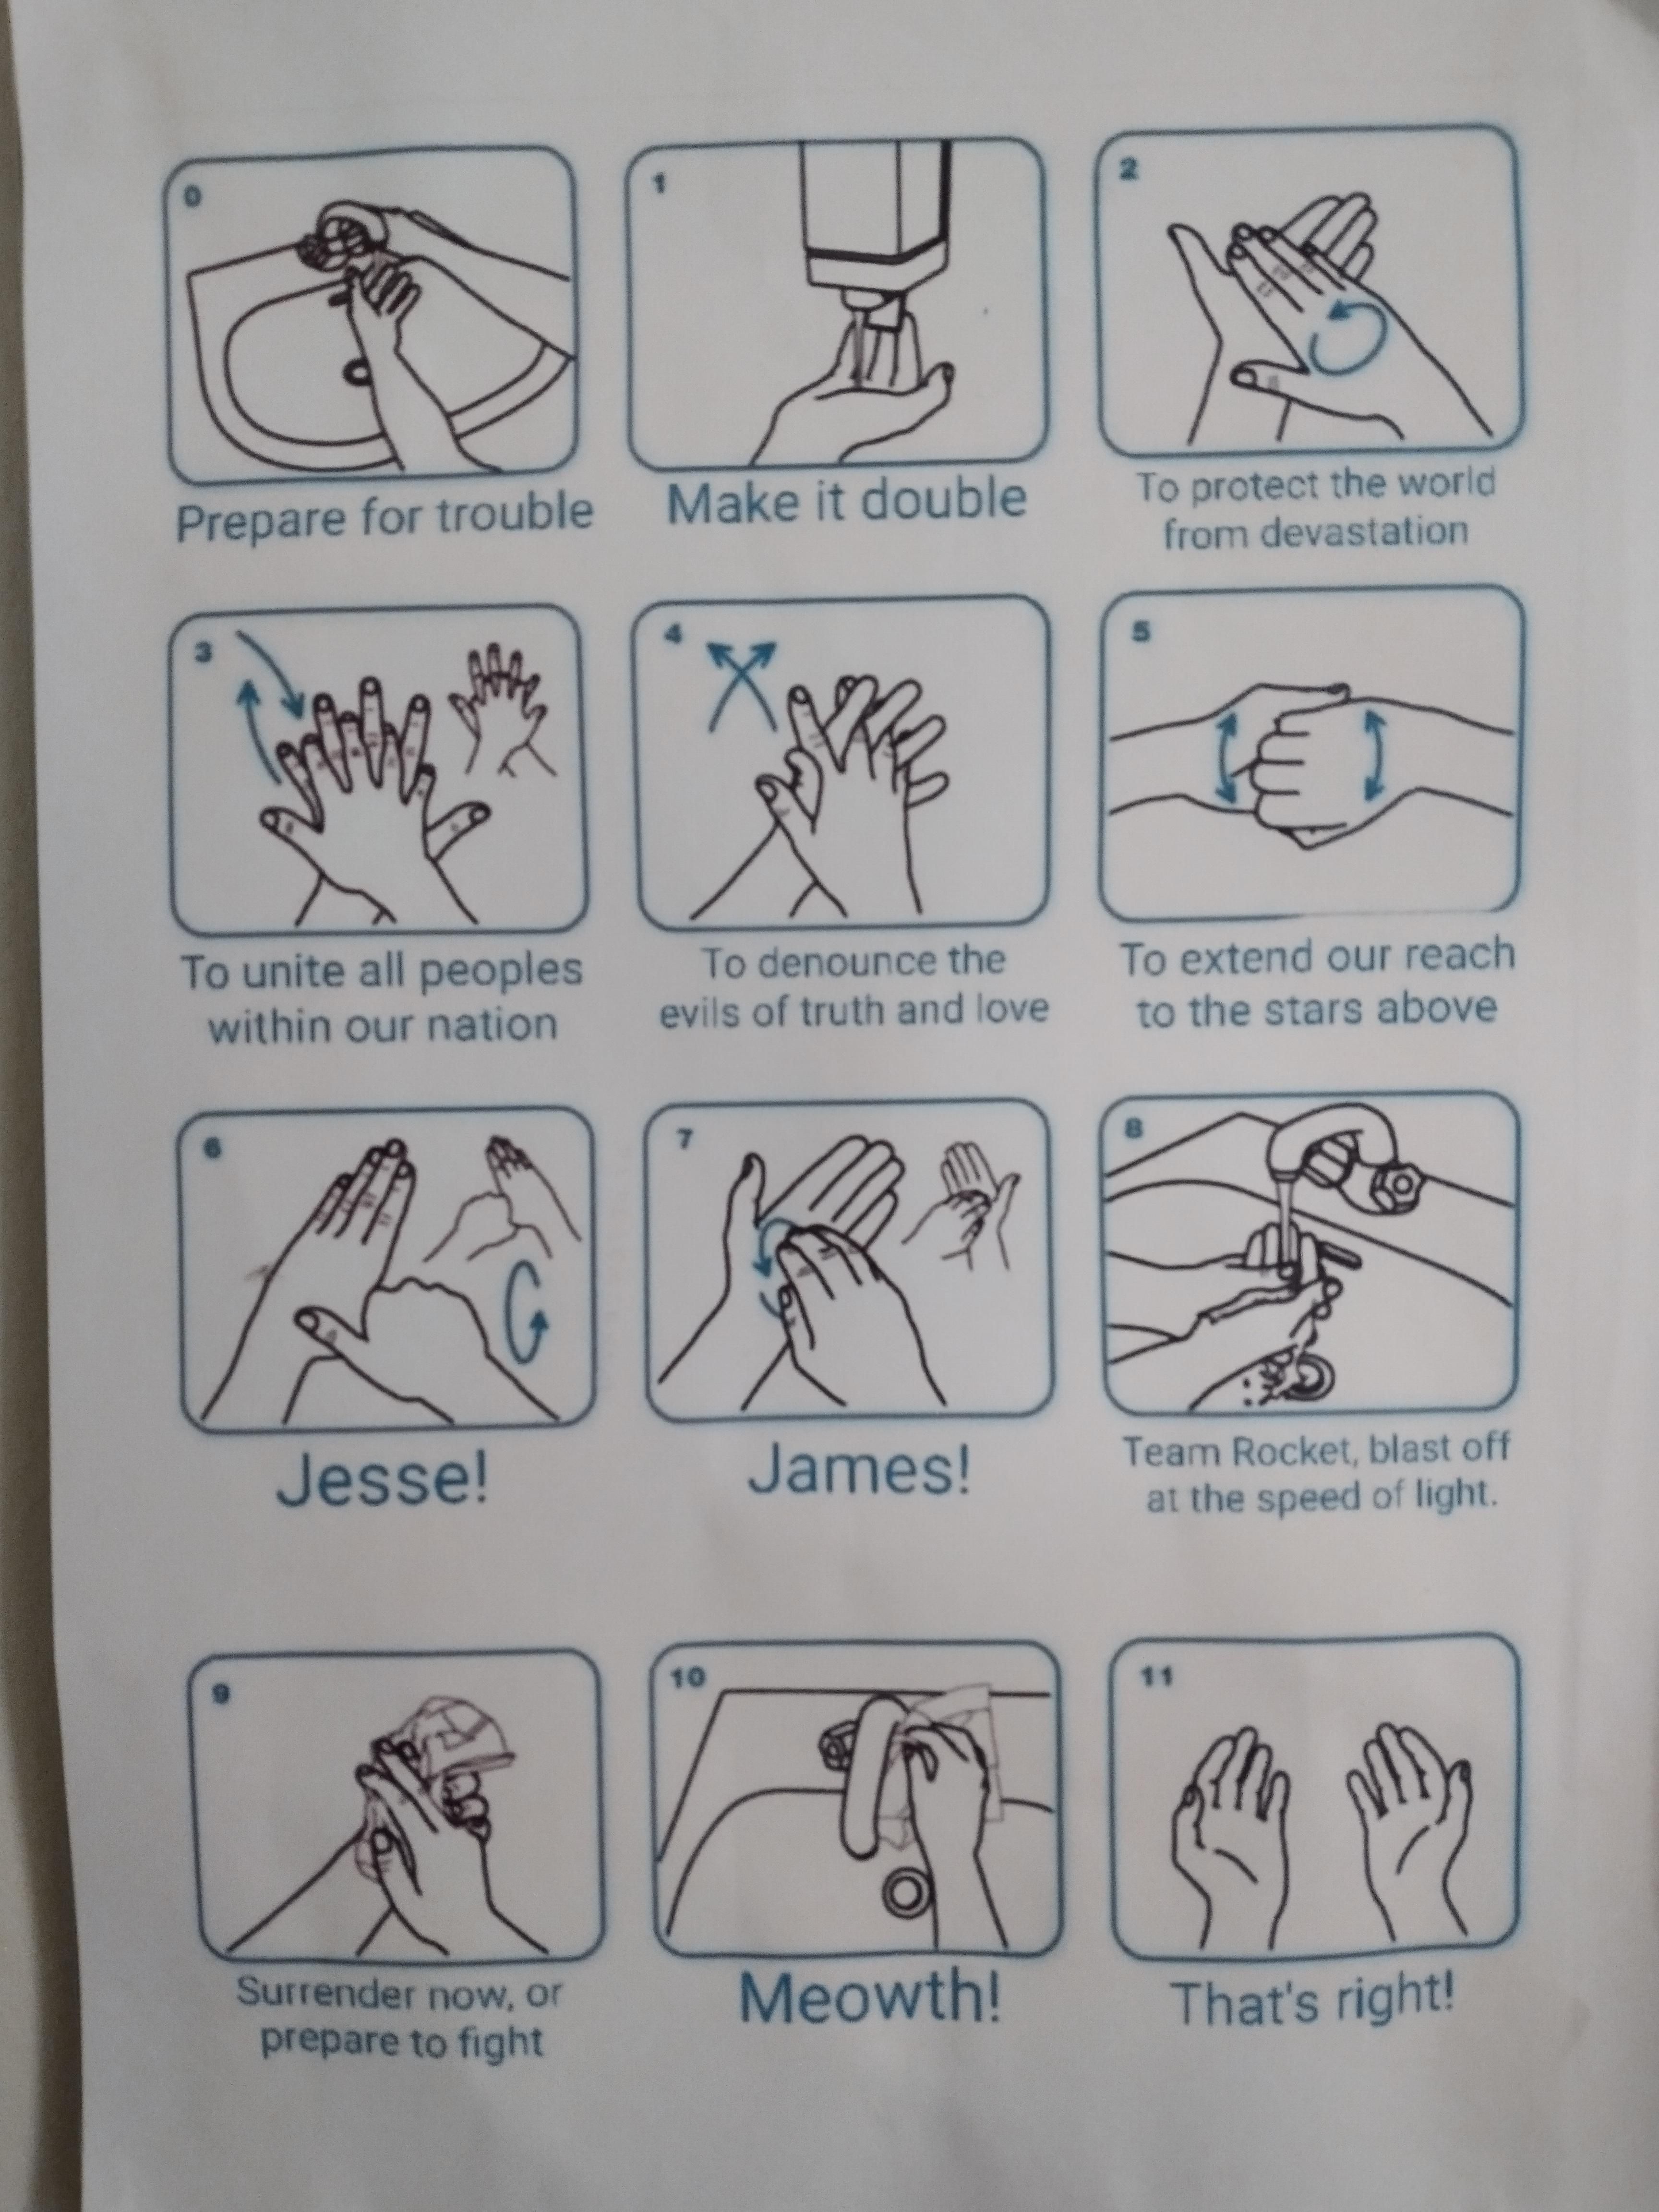 These are the instructions how to wash your hands in my school.